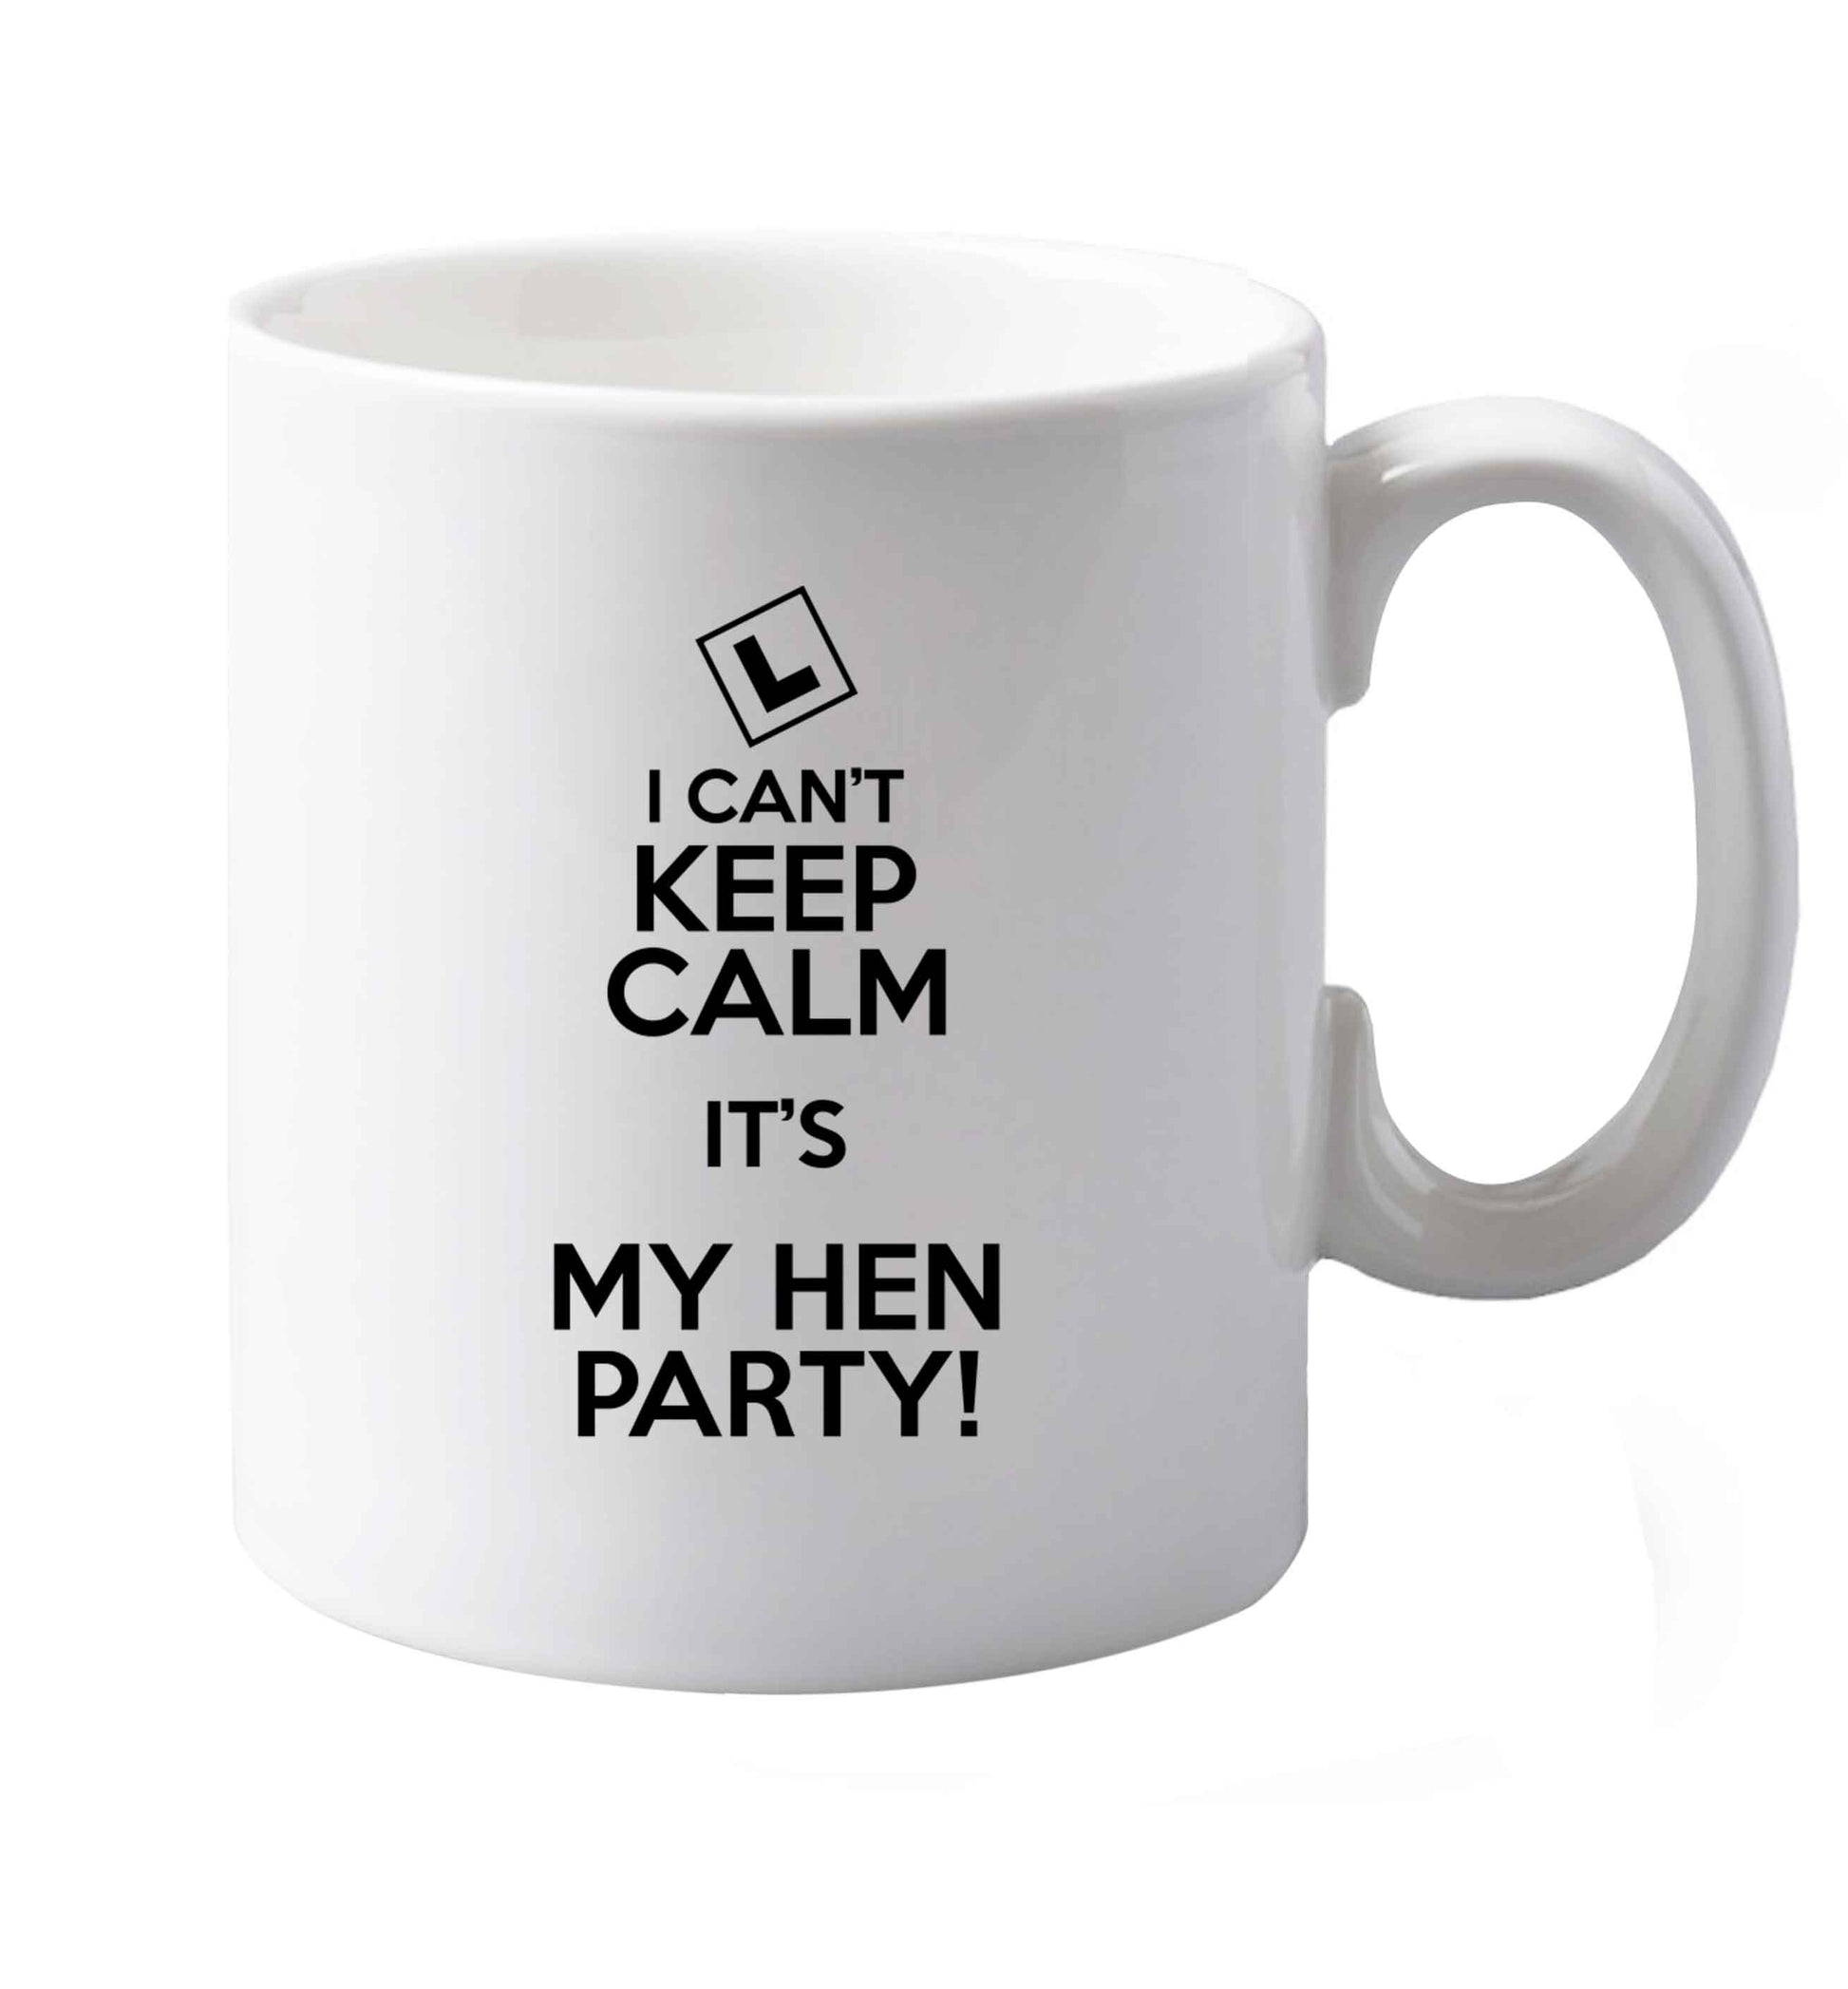 10 oz I can't keep calm it's my hen party   ceramic mug both sides